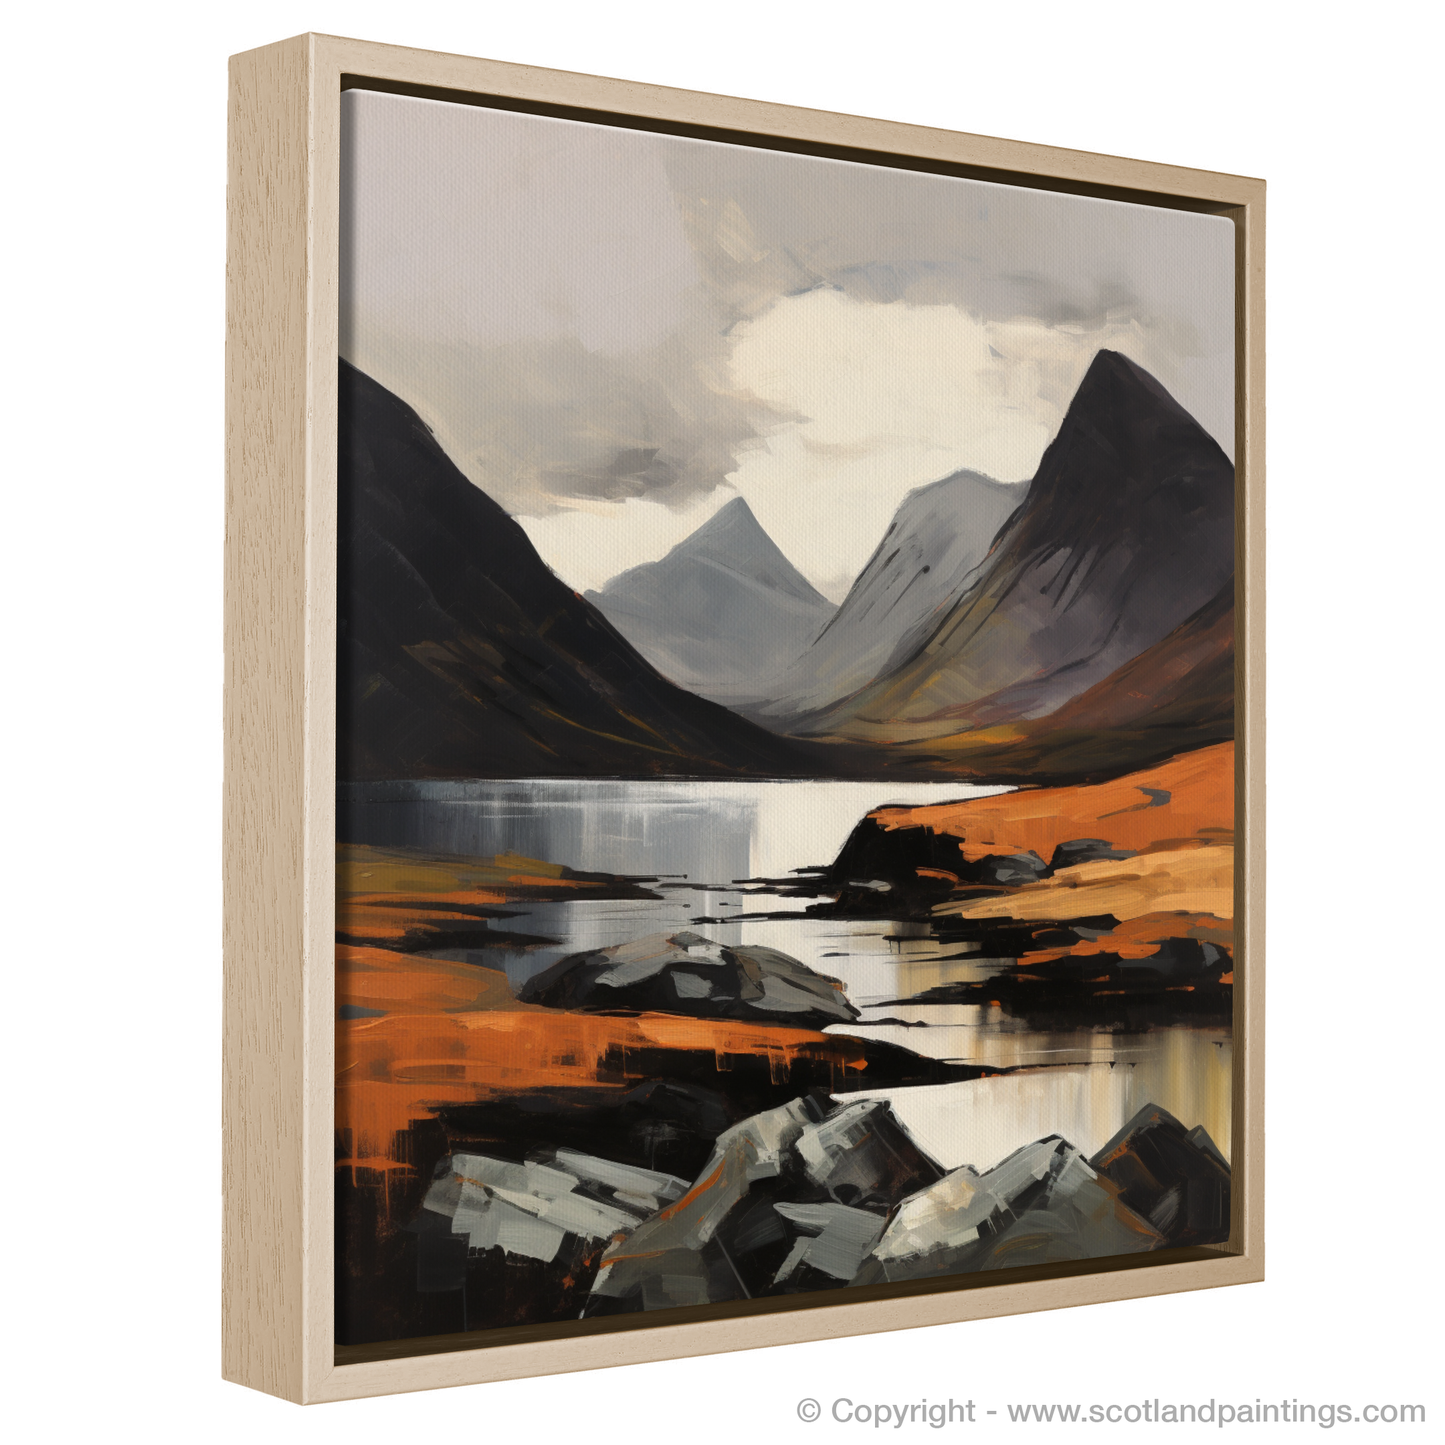 Painting and Art Print of Liathach, Wester Ross entitled "Liathach's Rugged Majesty: An Expressionist Ode to the Scottish Highlands".